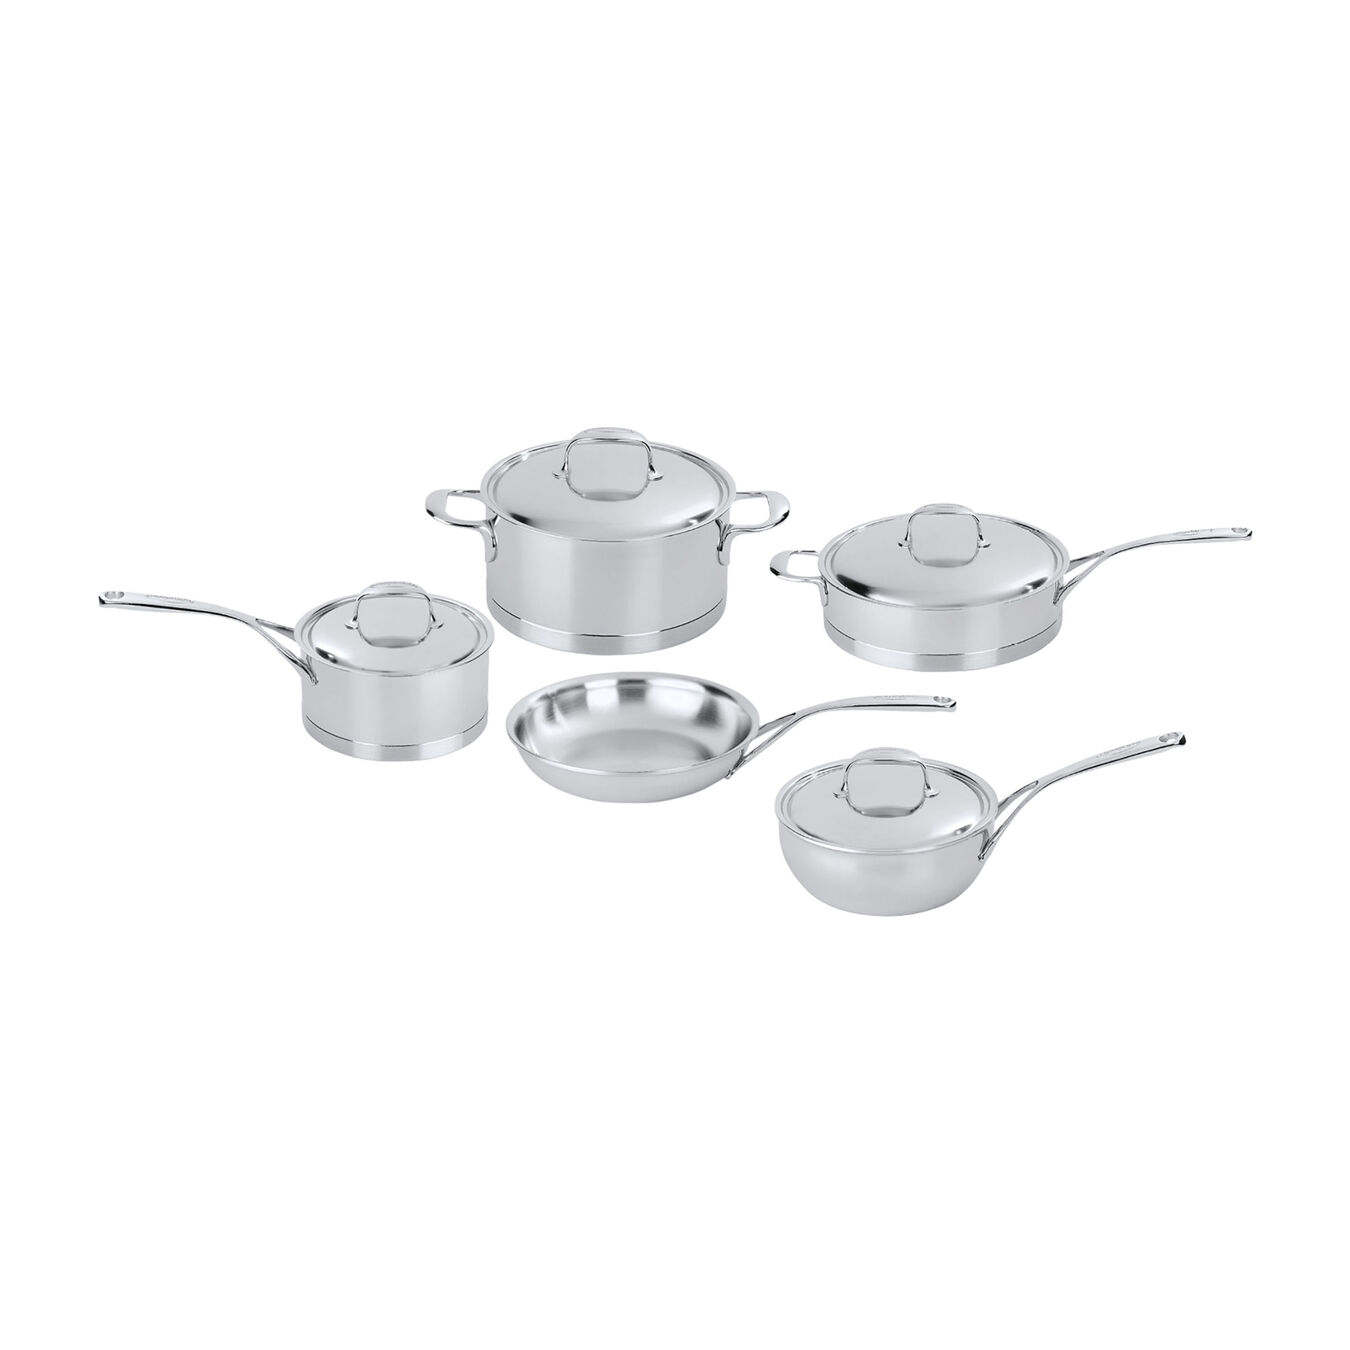 9-pc, Stainless Steel Cookware Set,,large 1